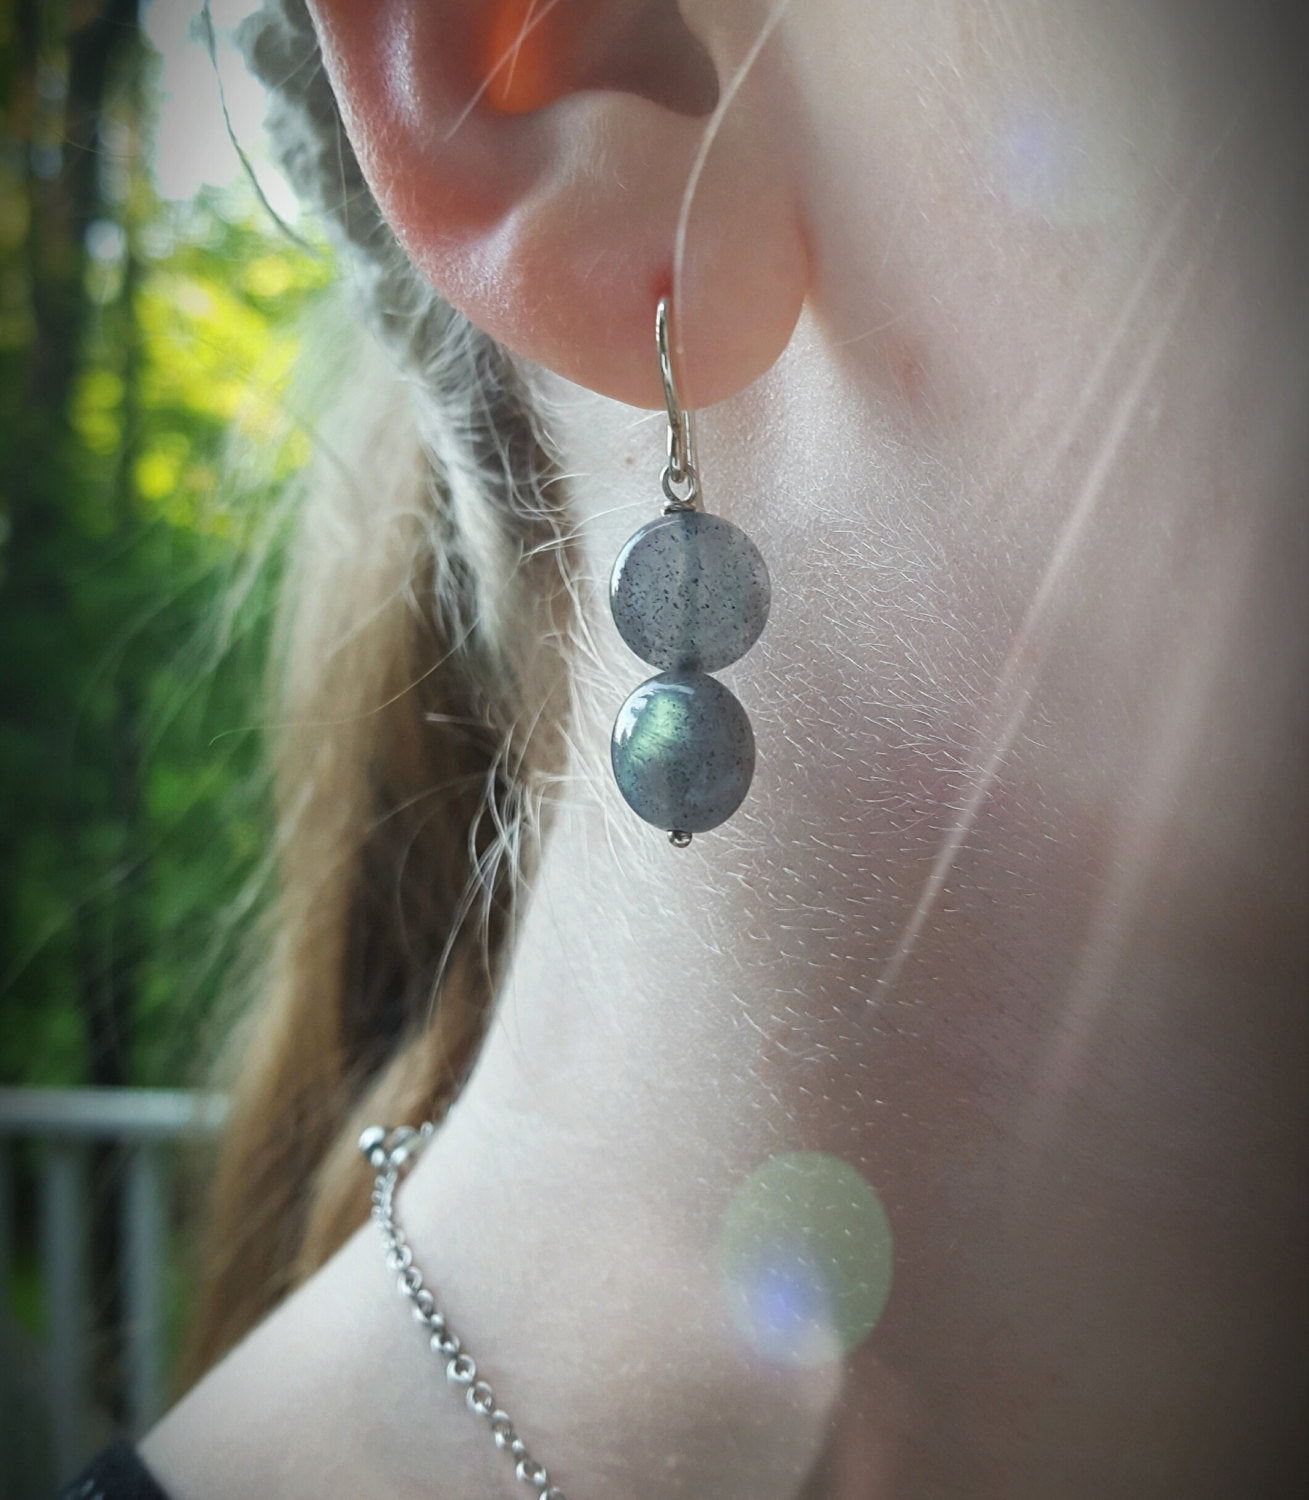 Labradorite Moonbeam Earrings, Smooth Iridescent Labradorite Beads Dangle on Sterling French Wires by Brie, Sleek, Minimalist, Everyday Glow